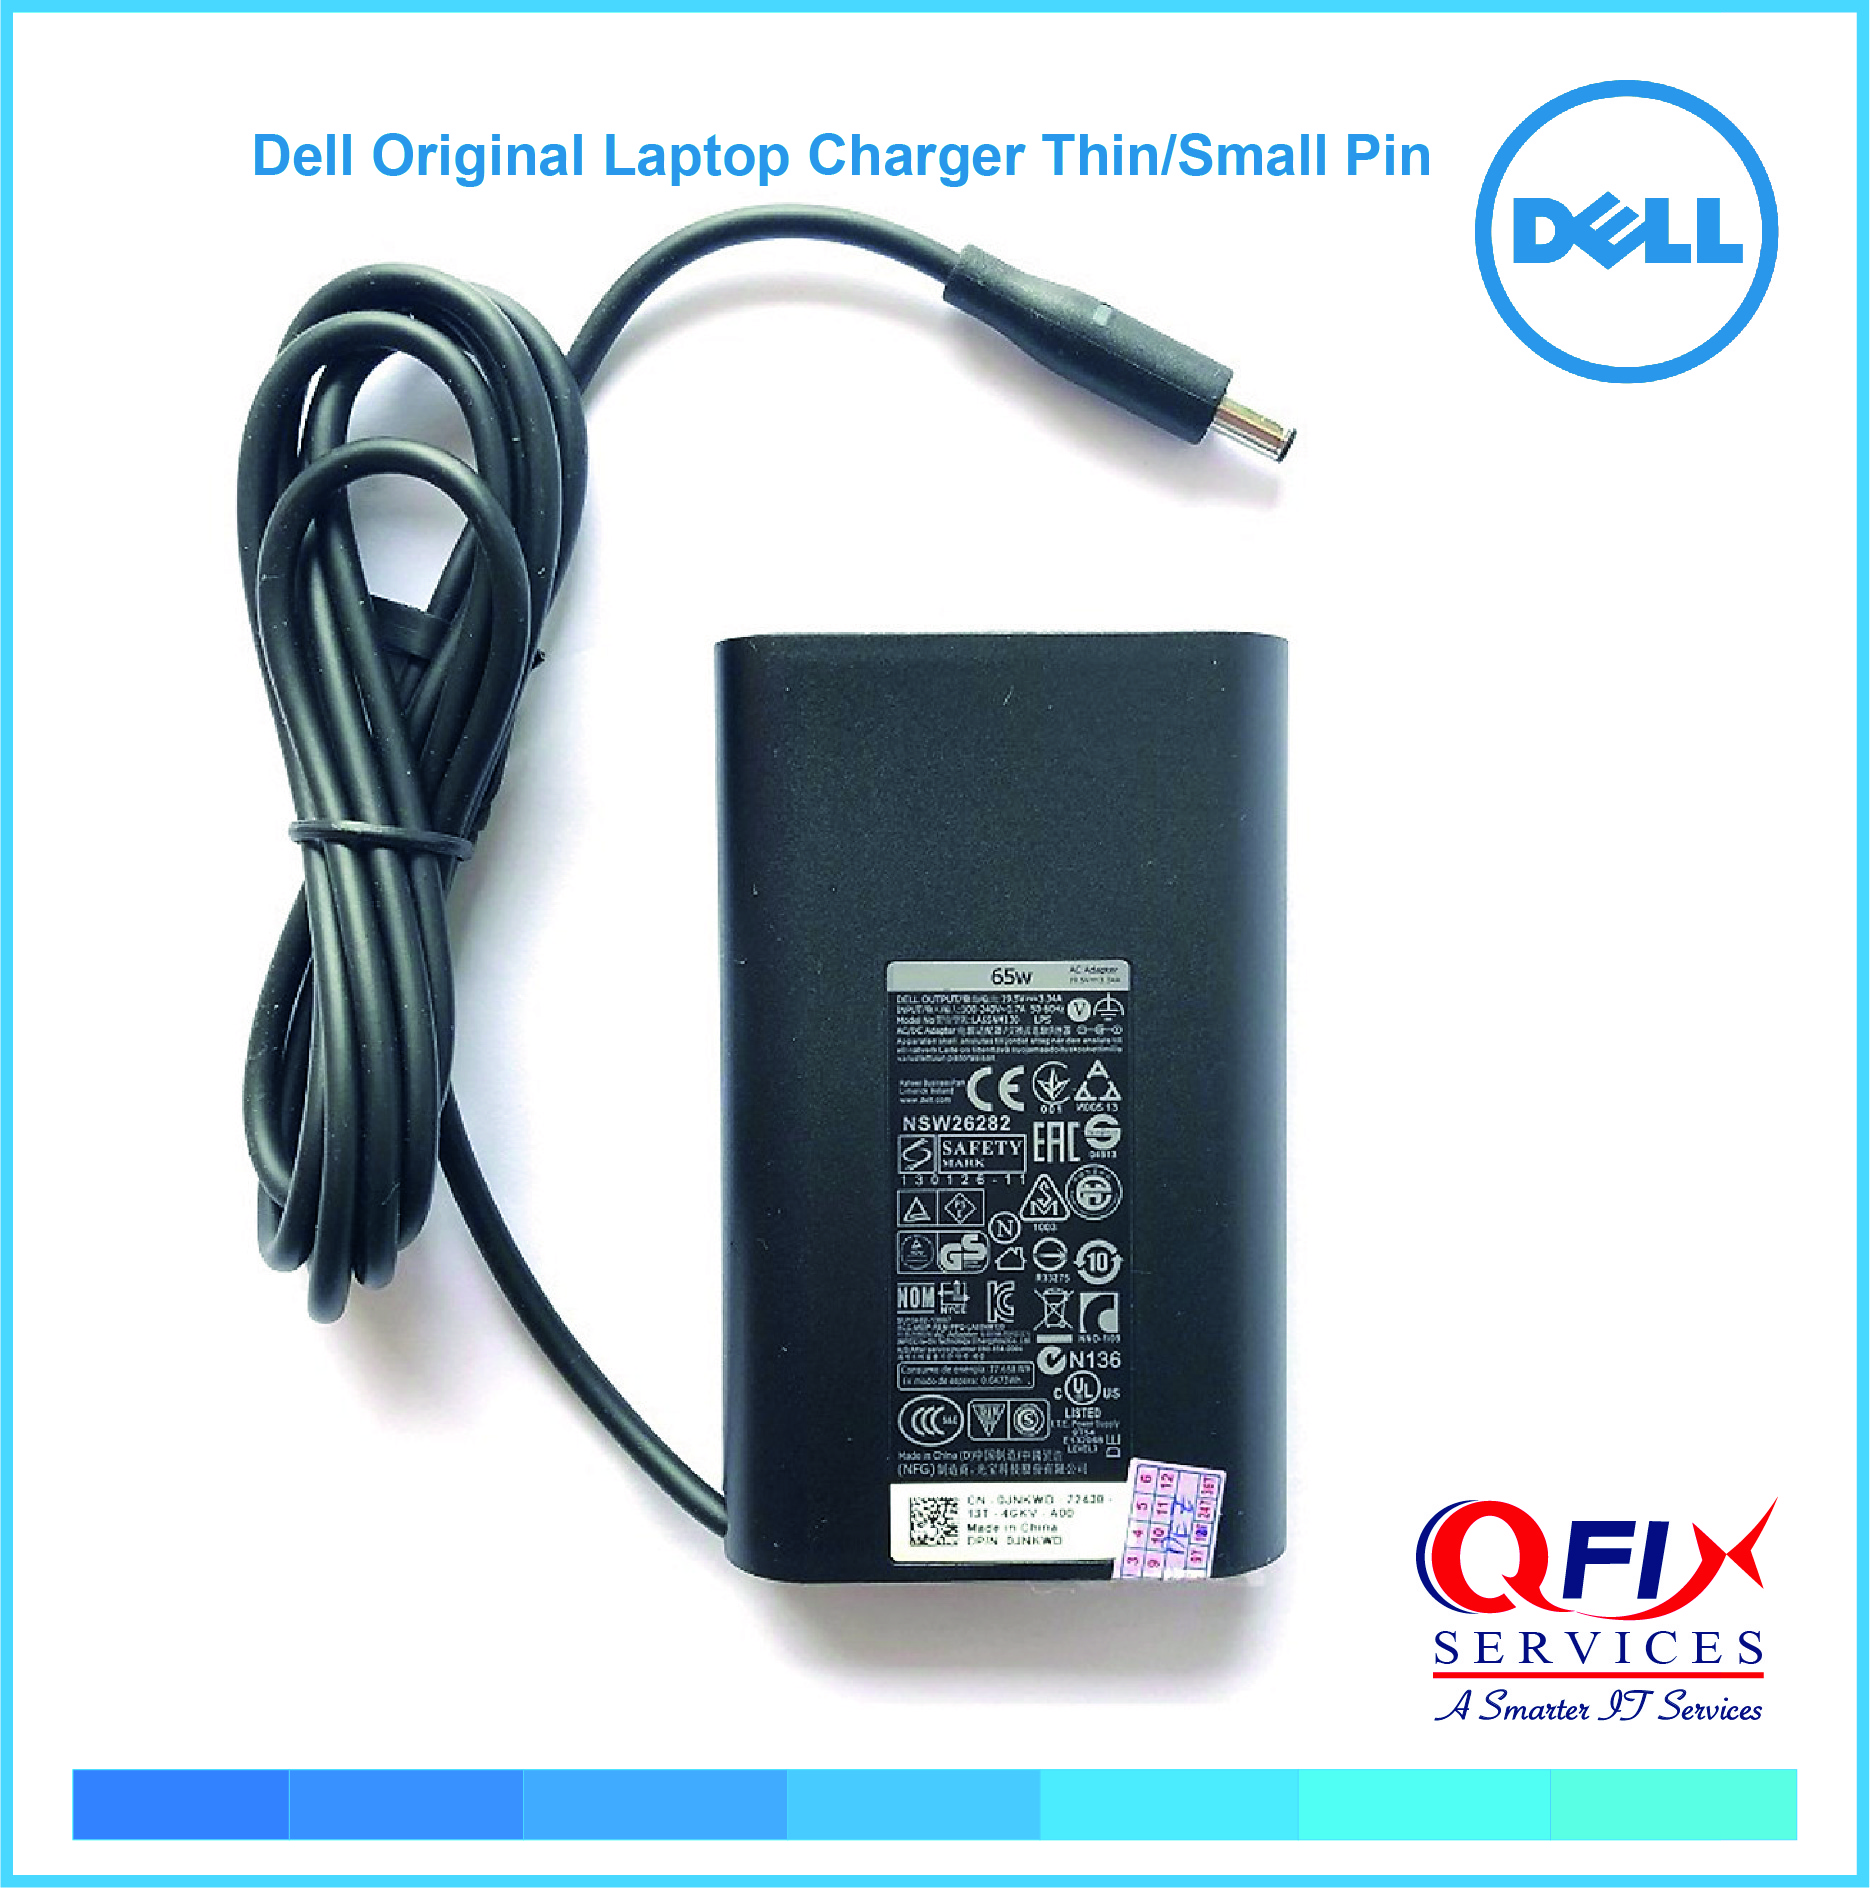 Dell Laptop Charger/ Adapter   65w Slim AC Adapter Original  -LA65NM130 - Best Computer Repair Services